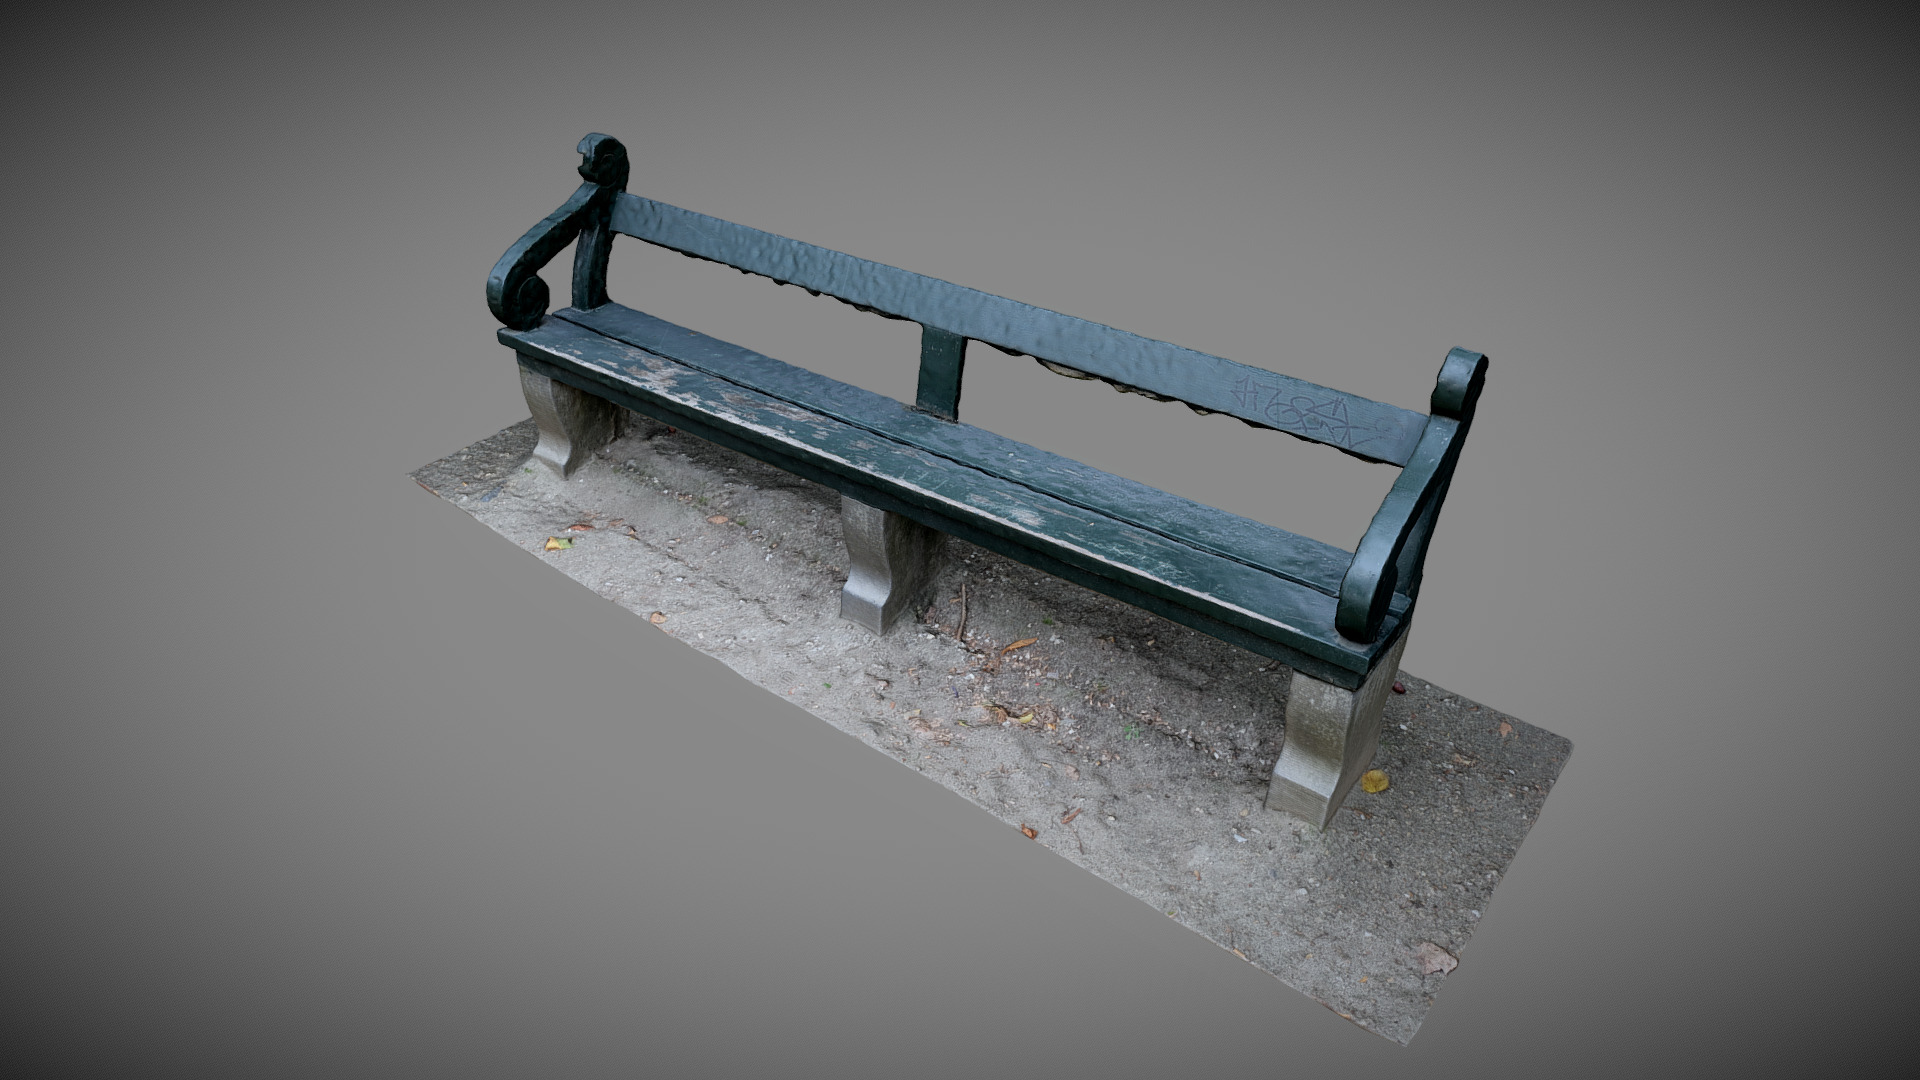 3D model Bench in Royal park in Brussels - This is a 3D model of the Bench in Royal park in Brussels. The 3D model is about a bench on a concrete floor.